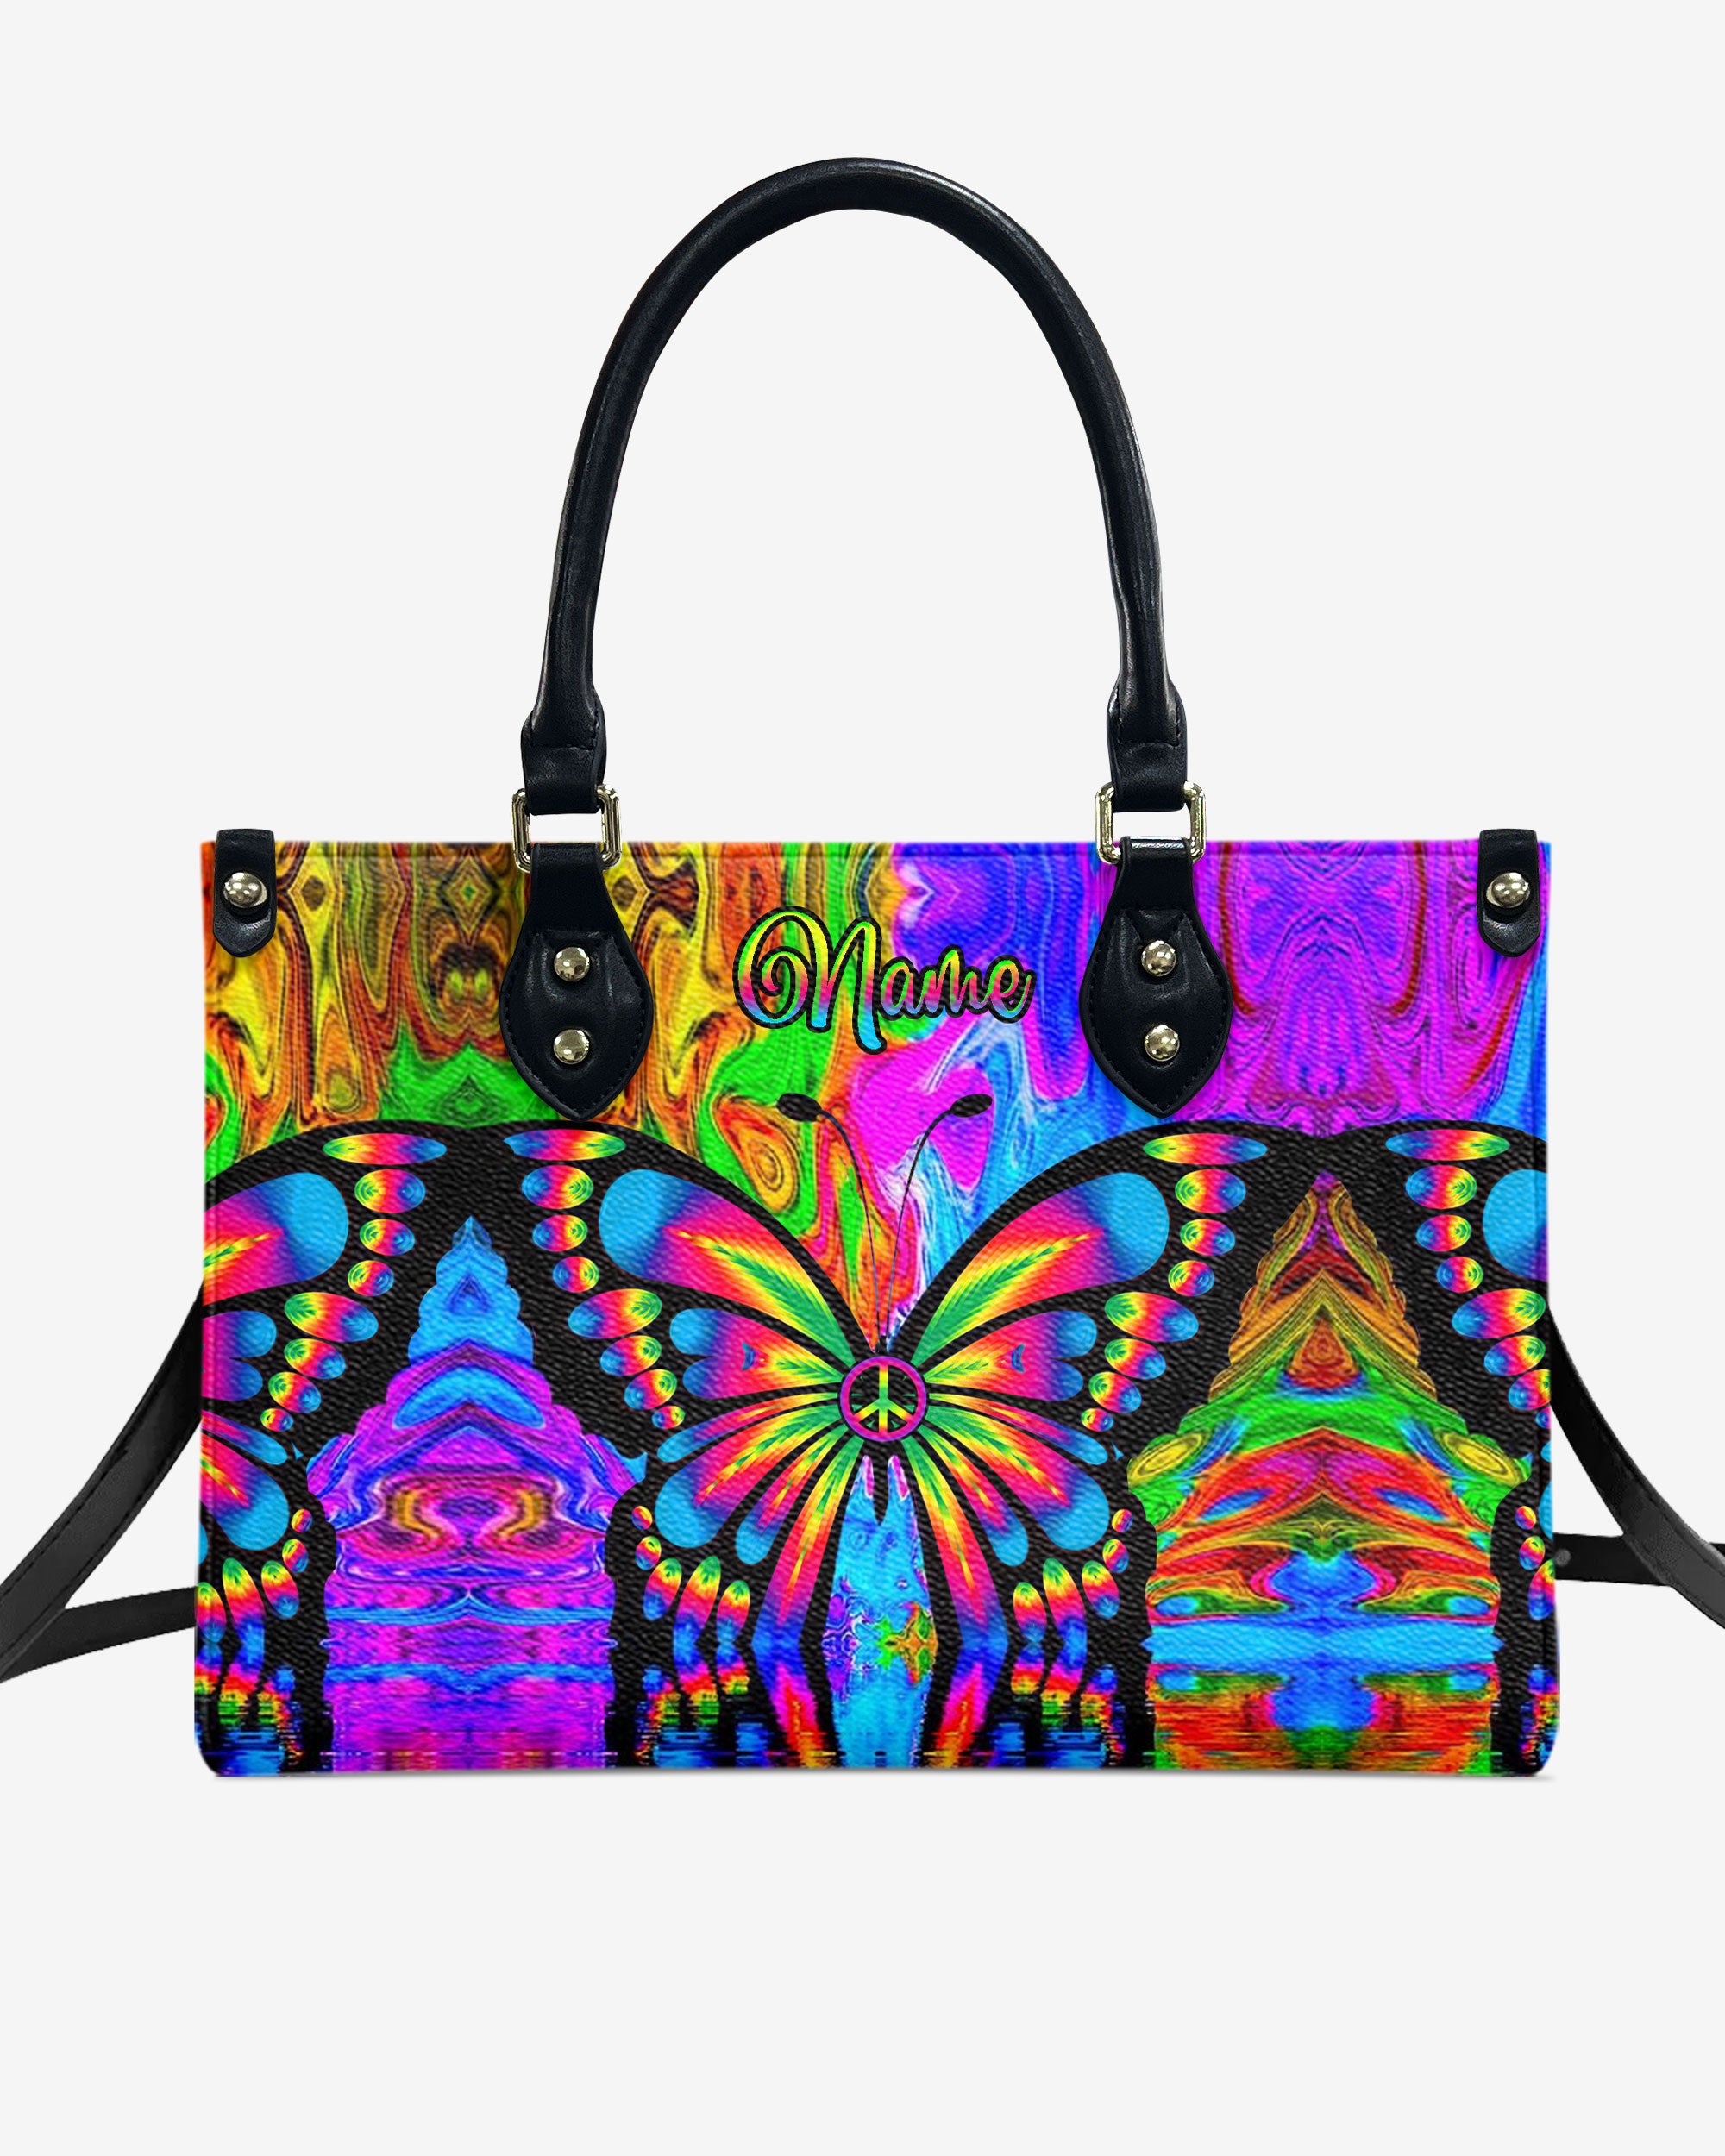 BUTTERFLY COLORFUL LEATHER HANDBAG - TLTW1106243